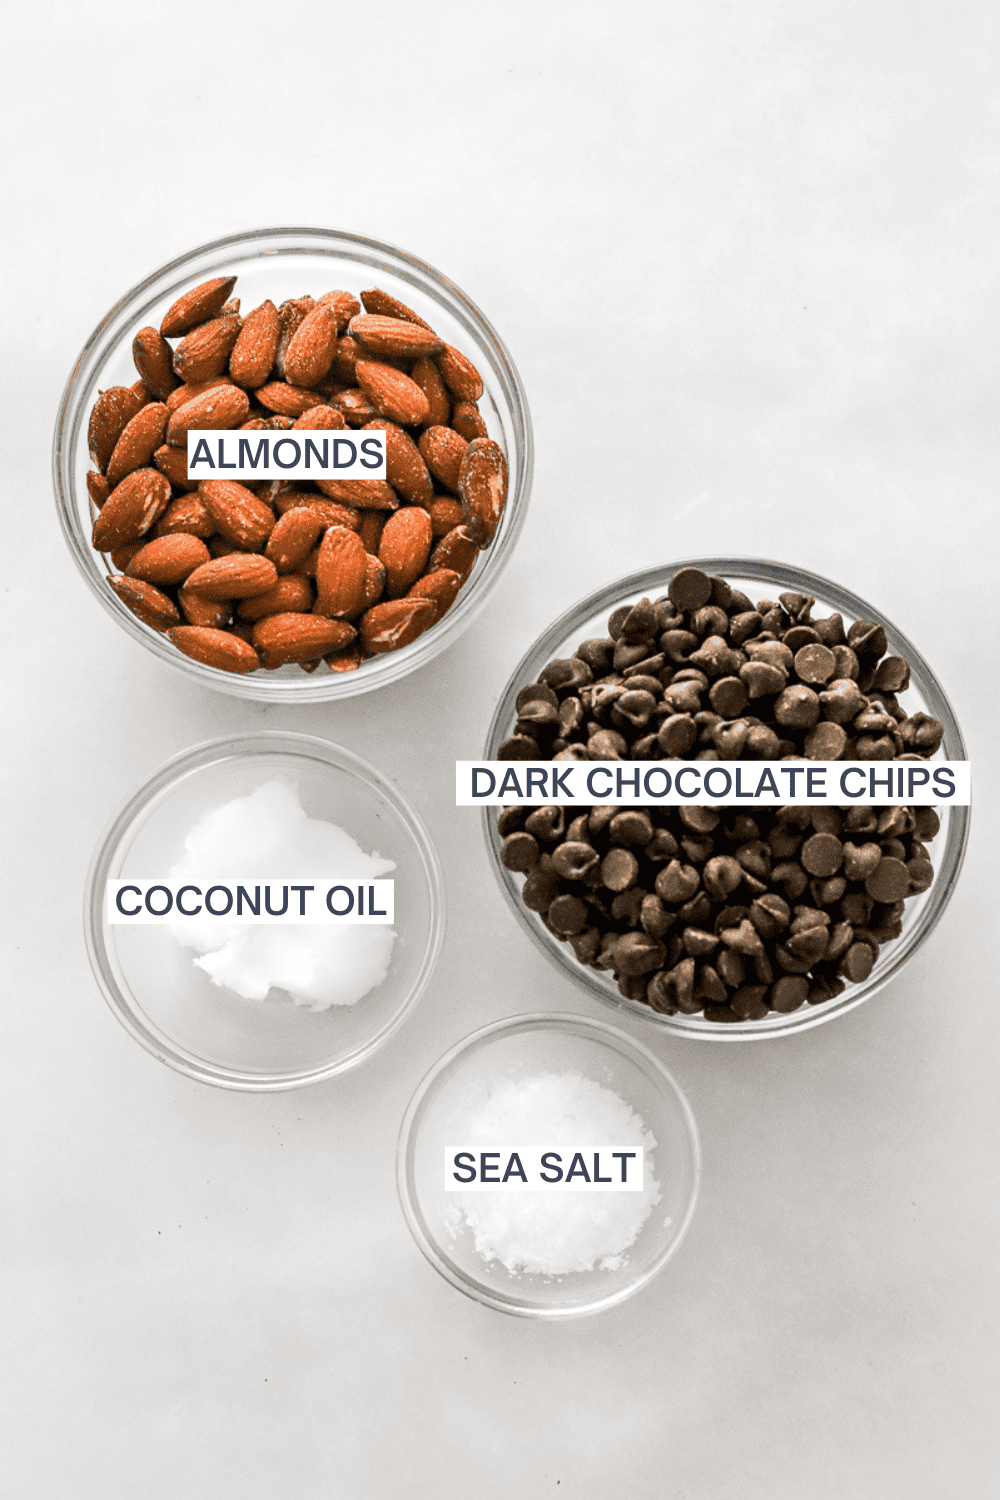 Ingredients for chocolate bark with almonds with labels over each ingredient.